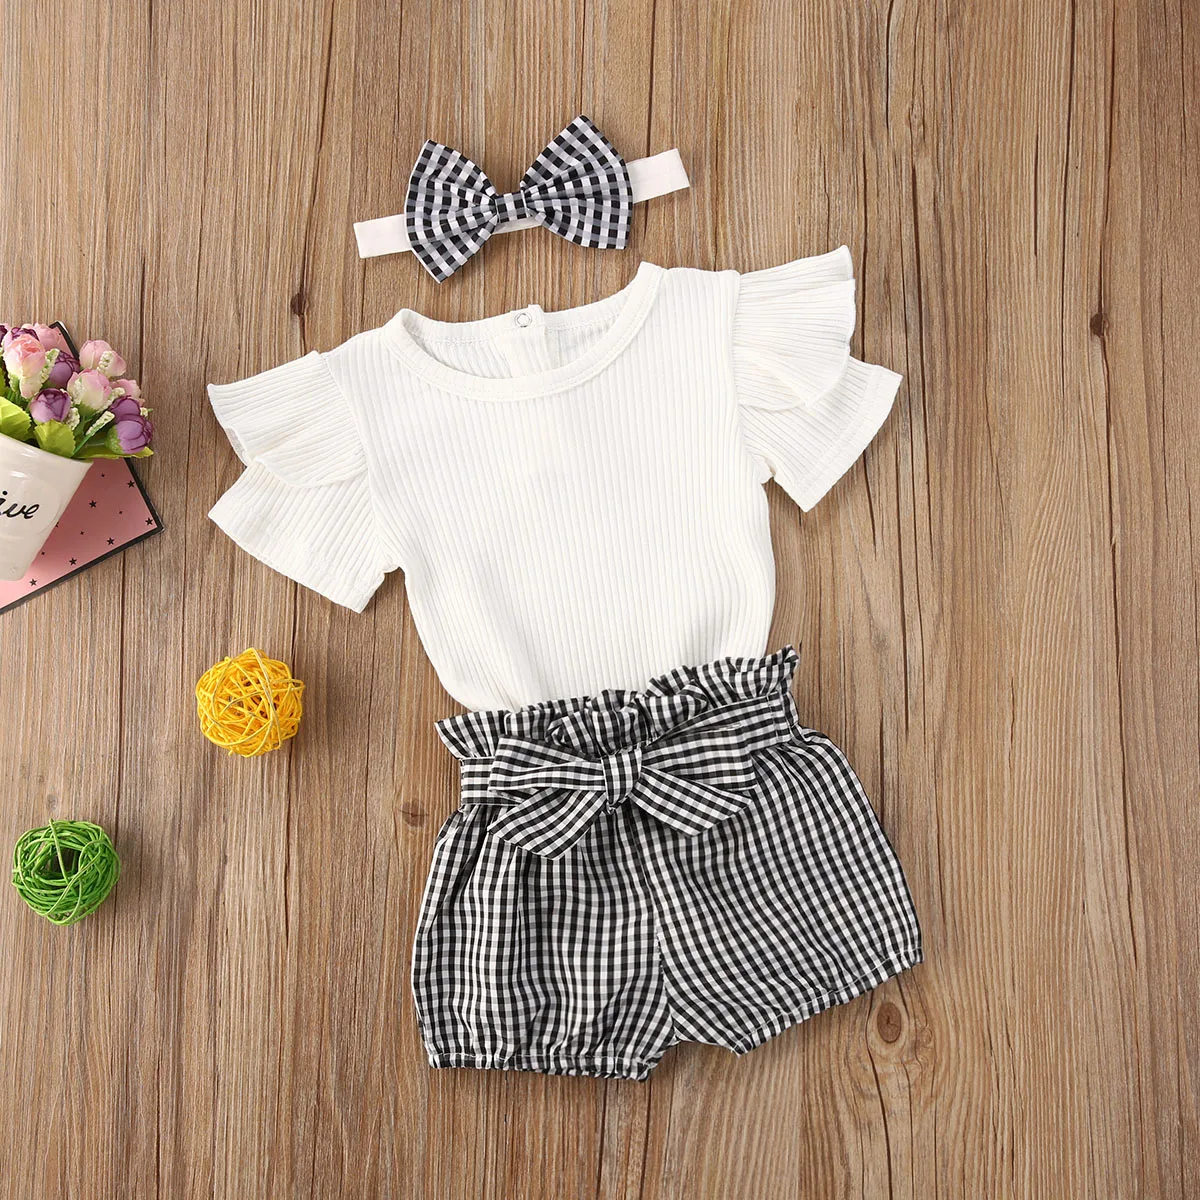 baby knitted clothing set Summer Solid 3Pcs Infant Girl Outfits Short Sleeve Ruffle Romper Plaid Shorts Bow Headband Baby Clothing Sets baby clothing set long sleeve	